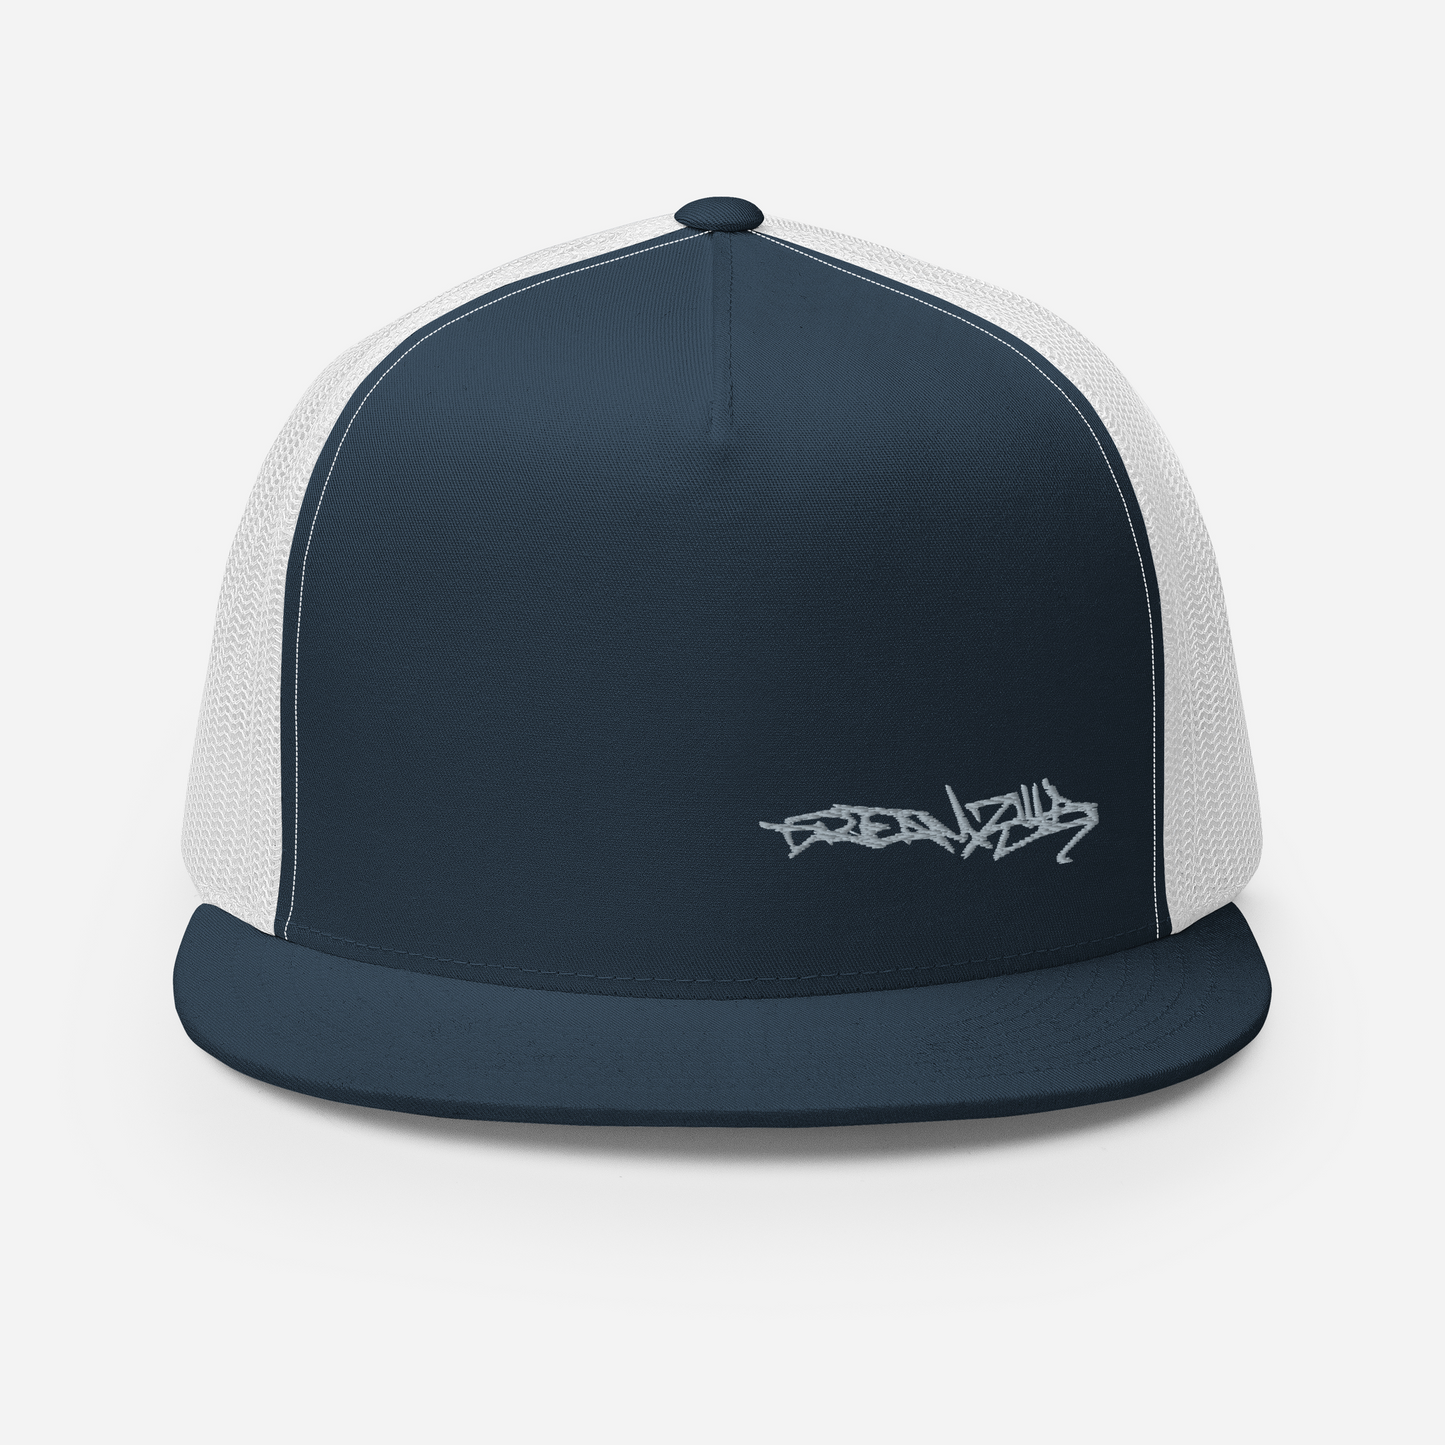 Graffiti Tag Trucker Cap in Navy with White Back